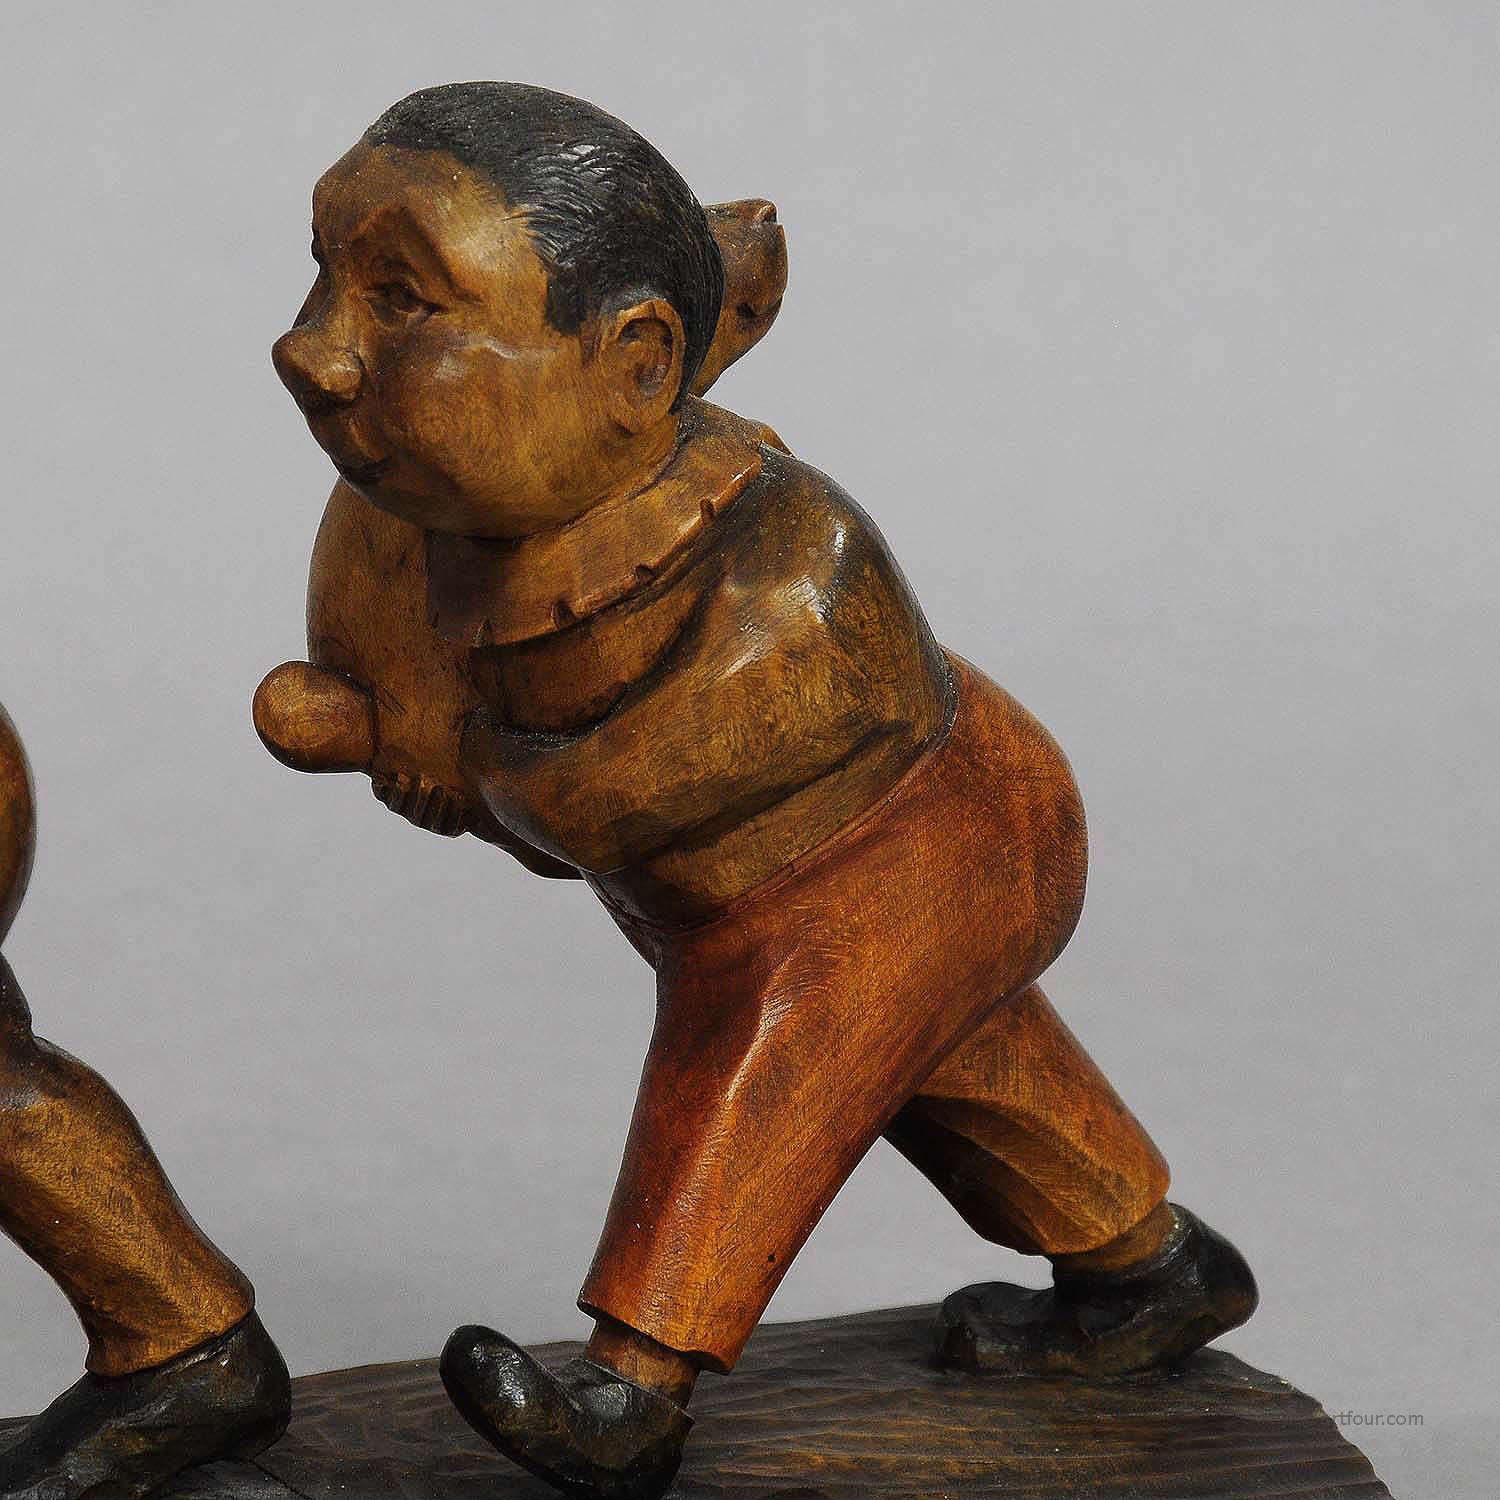 Whimsy Antique Woodcarving of Plisch and Plum by Wilhelm Busch